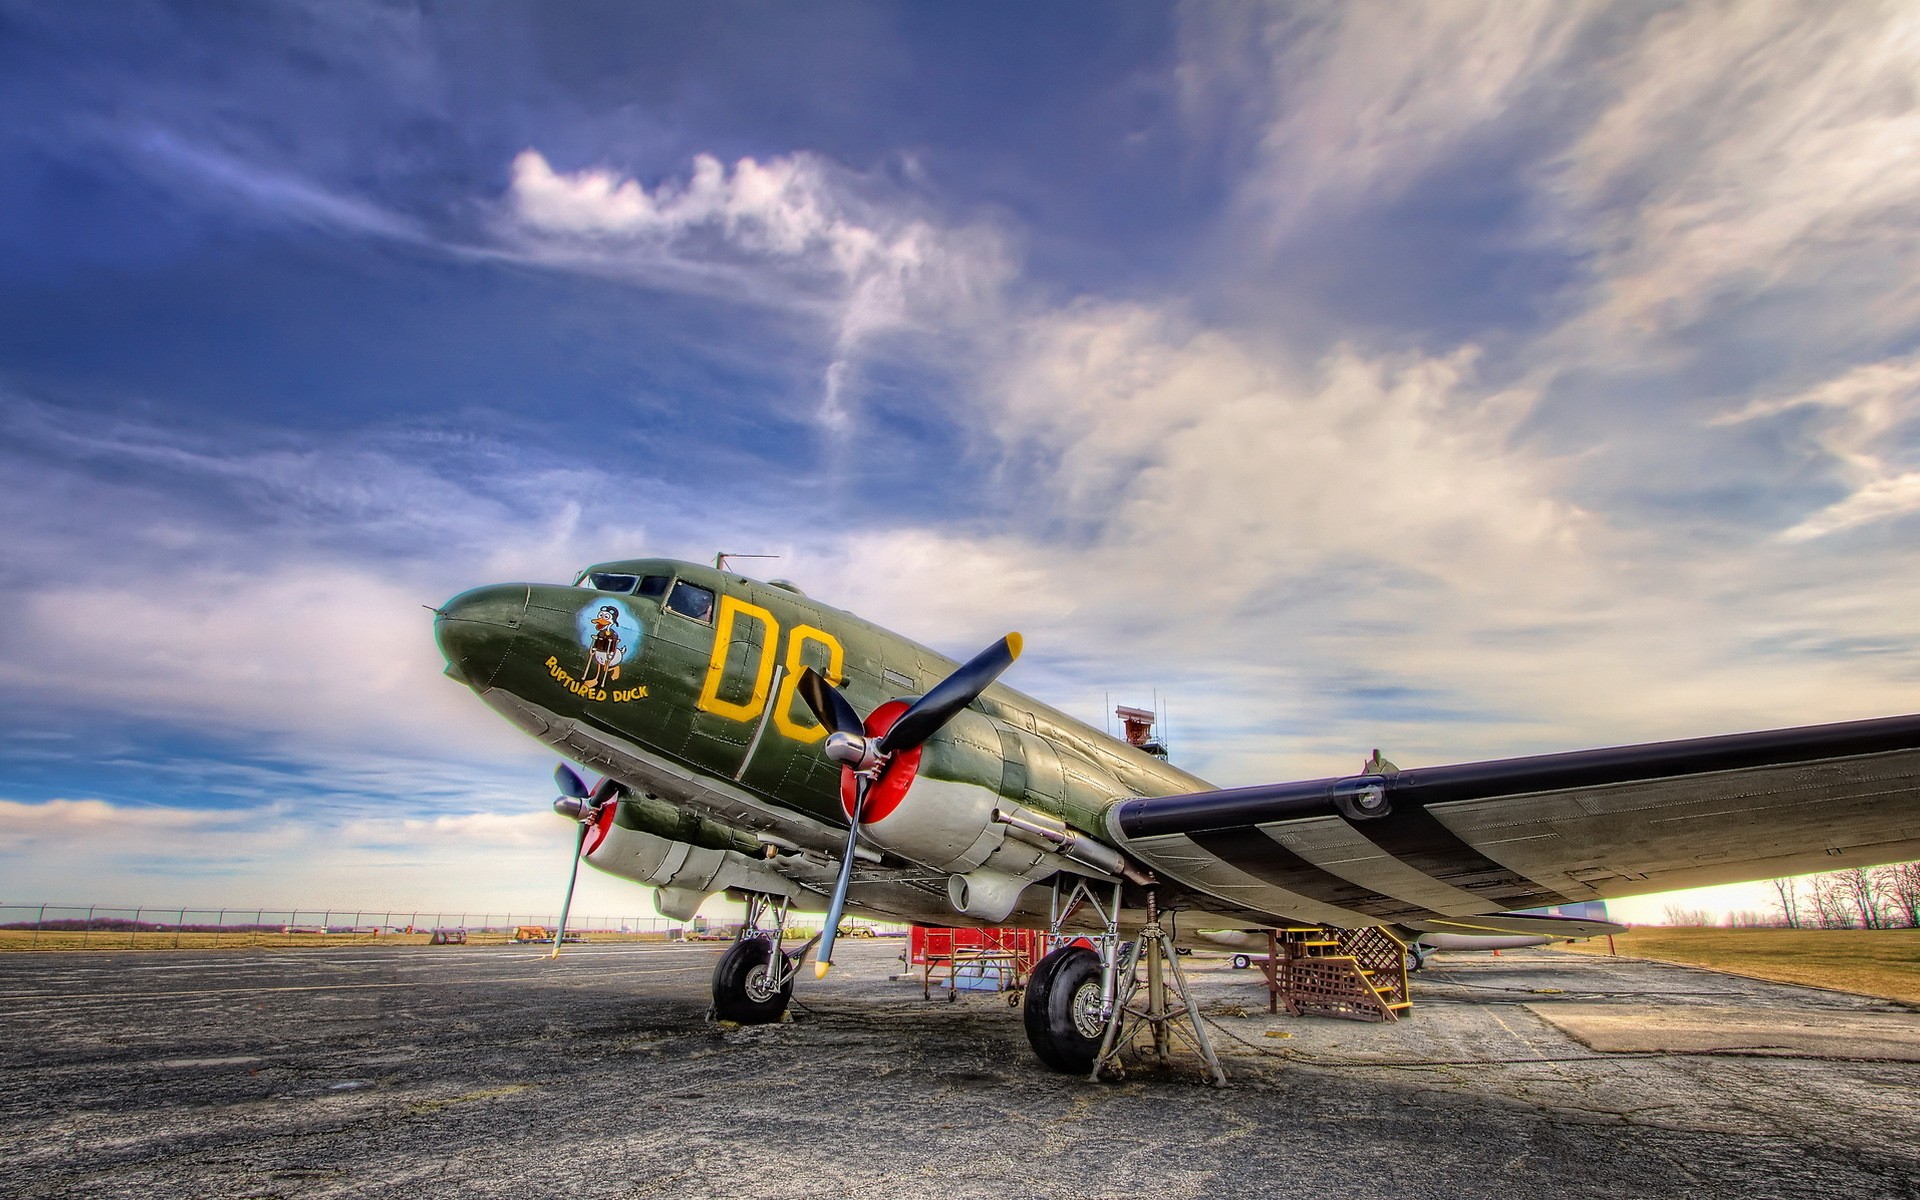 General 1920x1200 aircraft vehicle military vehicle military military aircraft C-47 Skytrain transport Warbird HDR airplane American aircraft